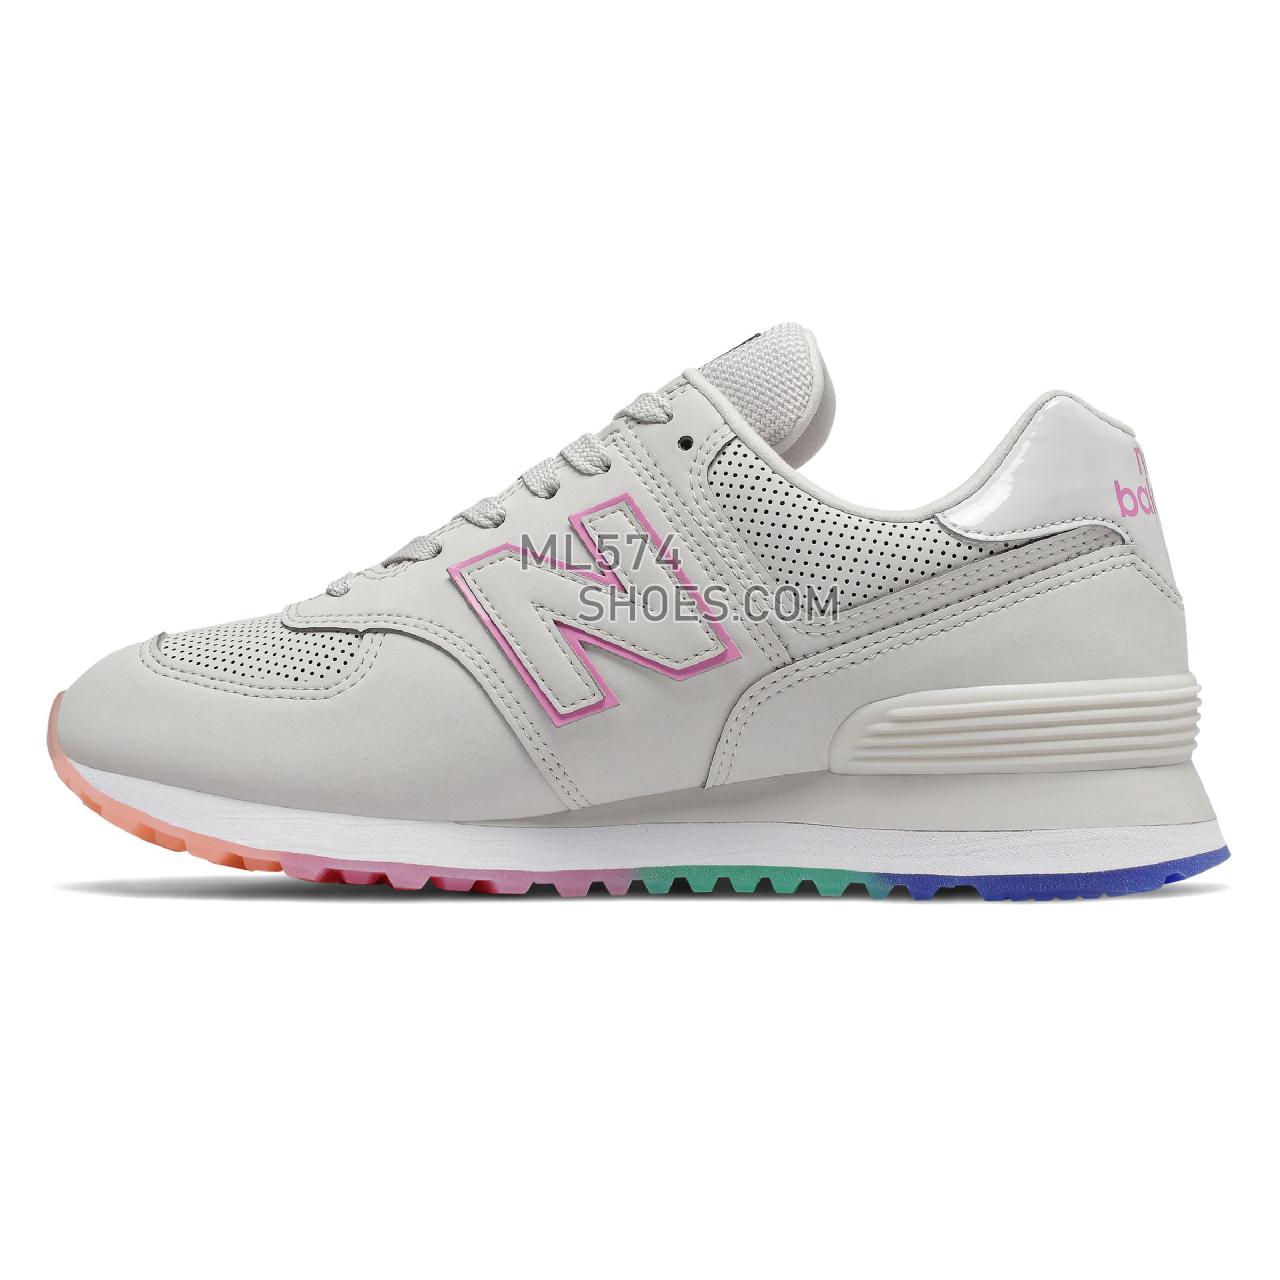 New Balance 574 - Women's Classic Sneakers - Linen Fog with Candy Pink - WL574SOL